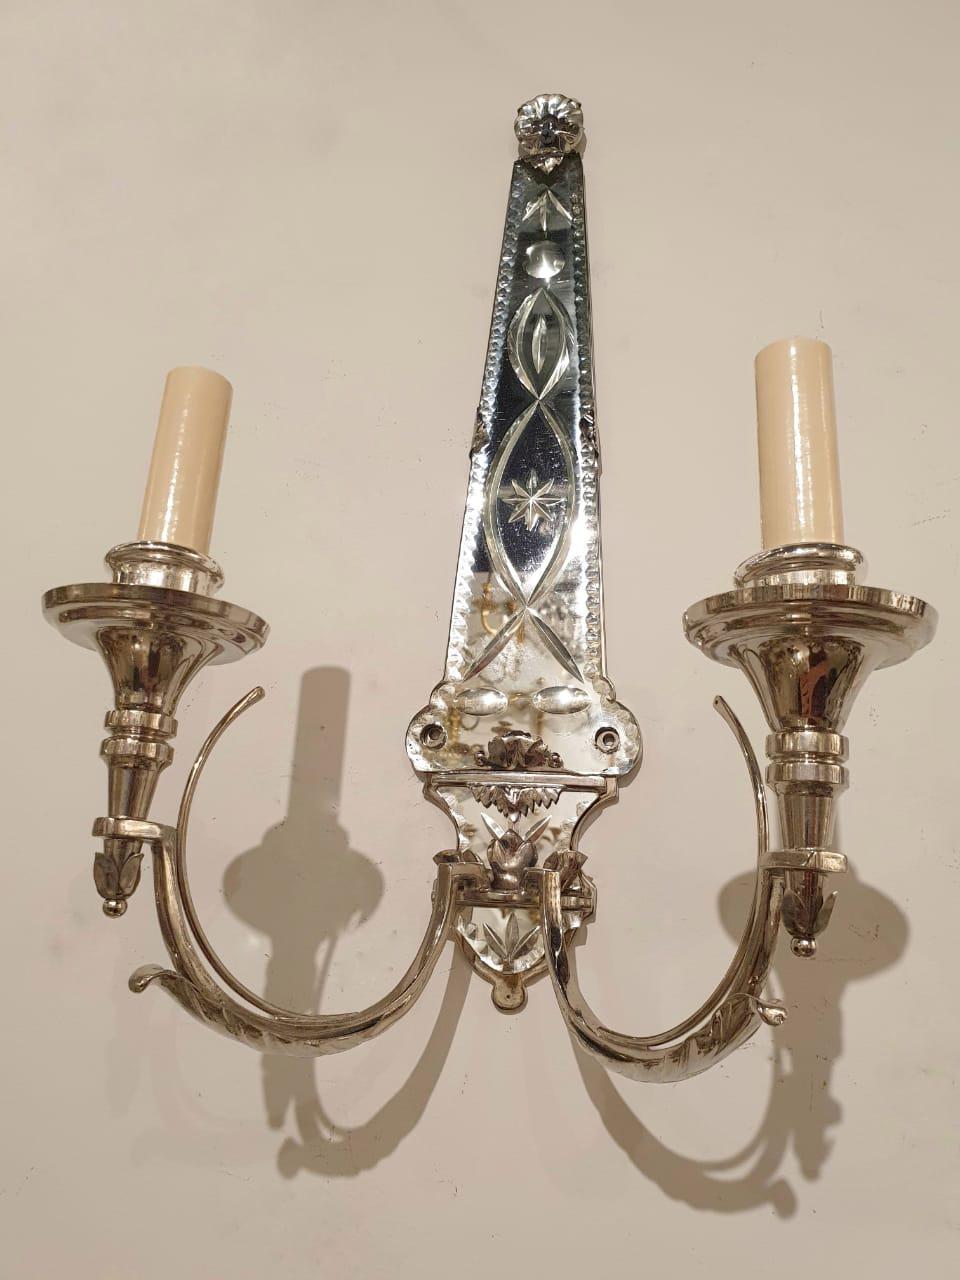 A pair of circa 1920’s silver plated mirrored backplate sconces with two lights, in French classic style. In great vintage condition. 

Dealer: G302YP 

